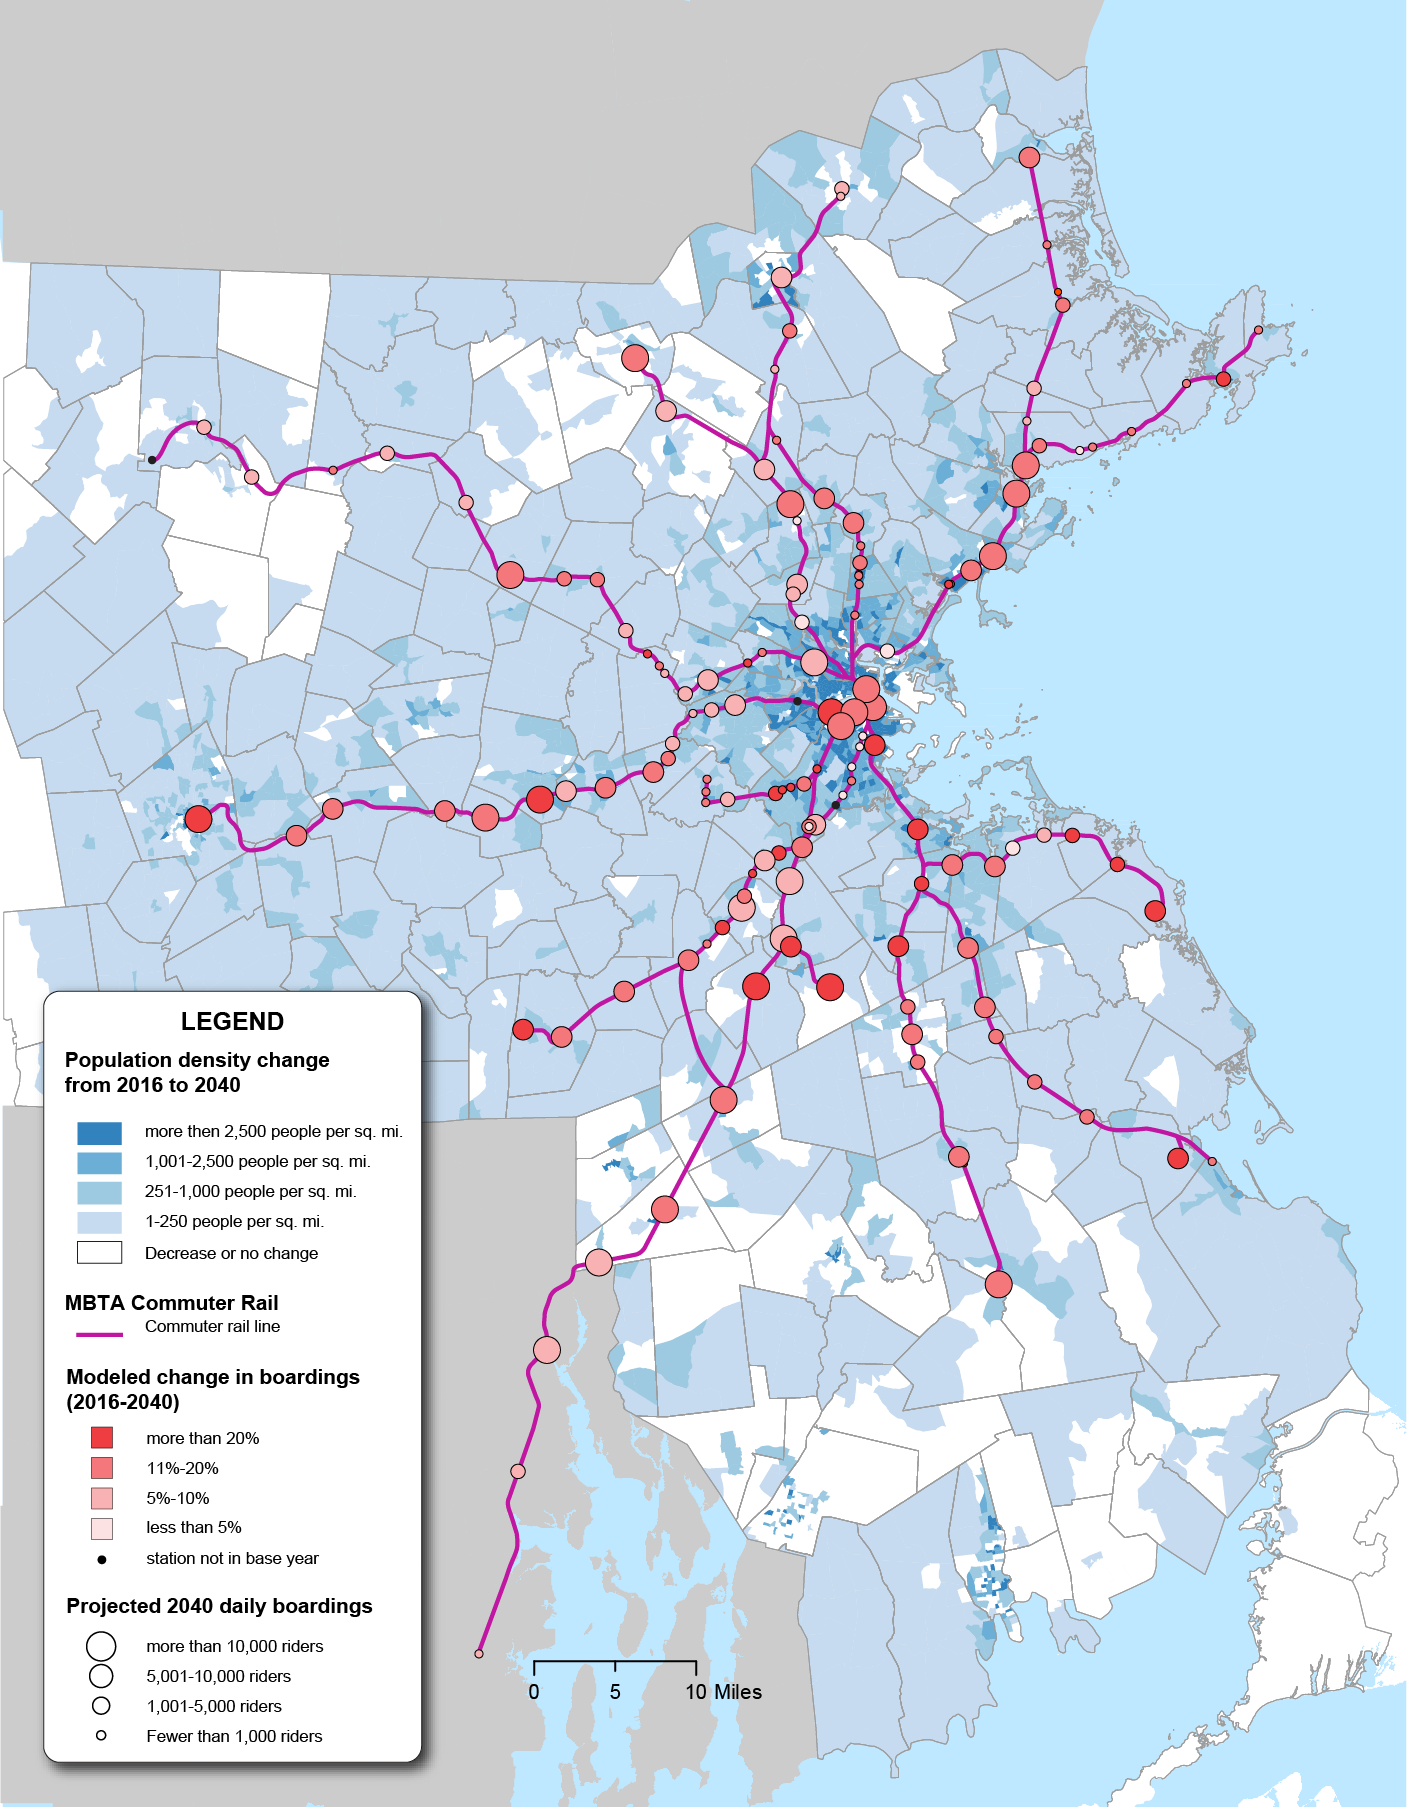 Figure 6-10 is a map of the Boston Region with MBTA Commuter Rail Lines overlaid with population density. Figure 6-10 also includes points reflecting the modeled change in boardings from 2016-2040 and Projected 2040 daily boardings. 